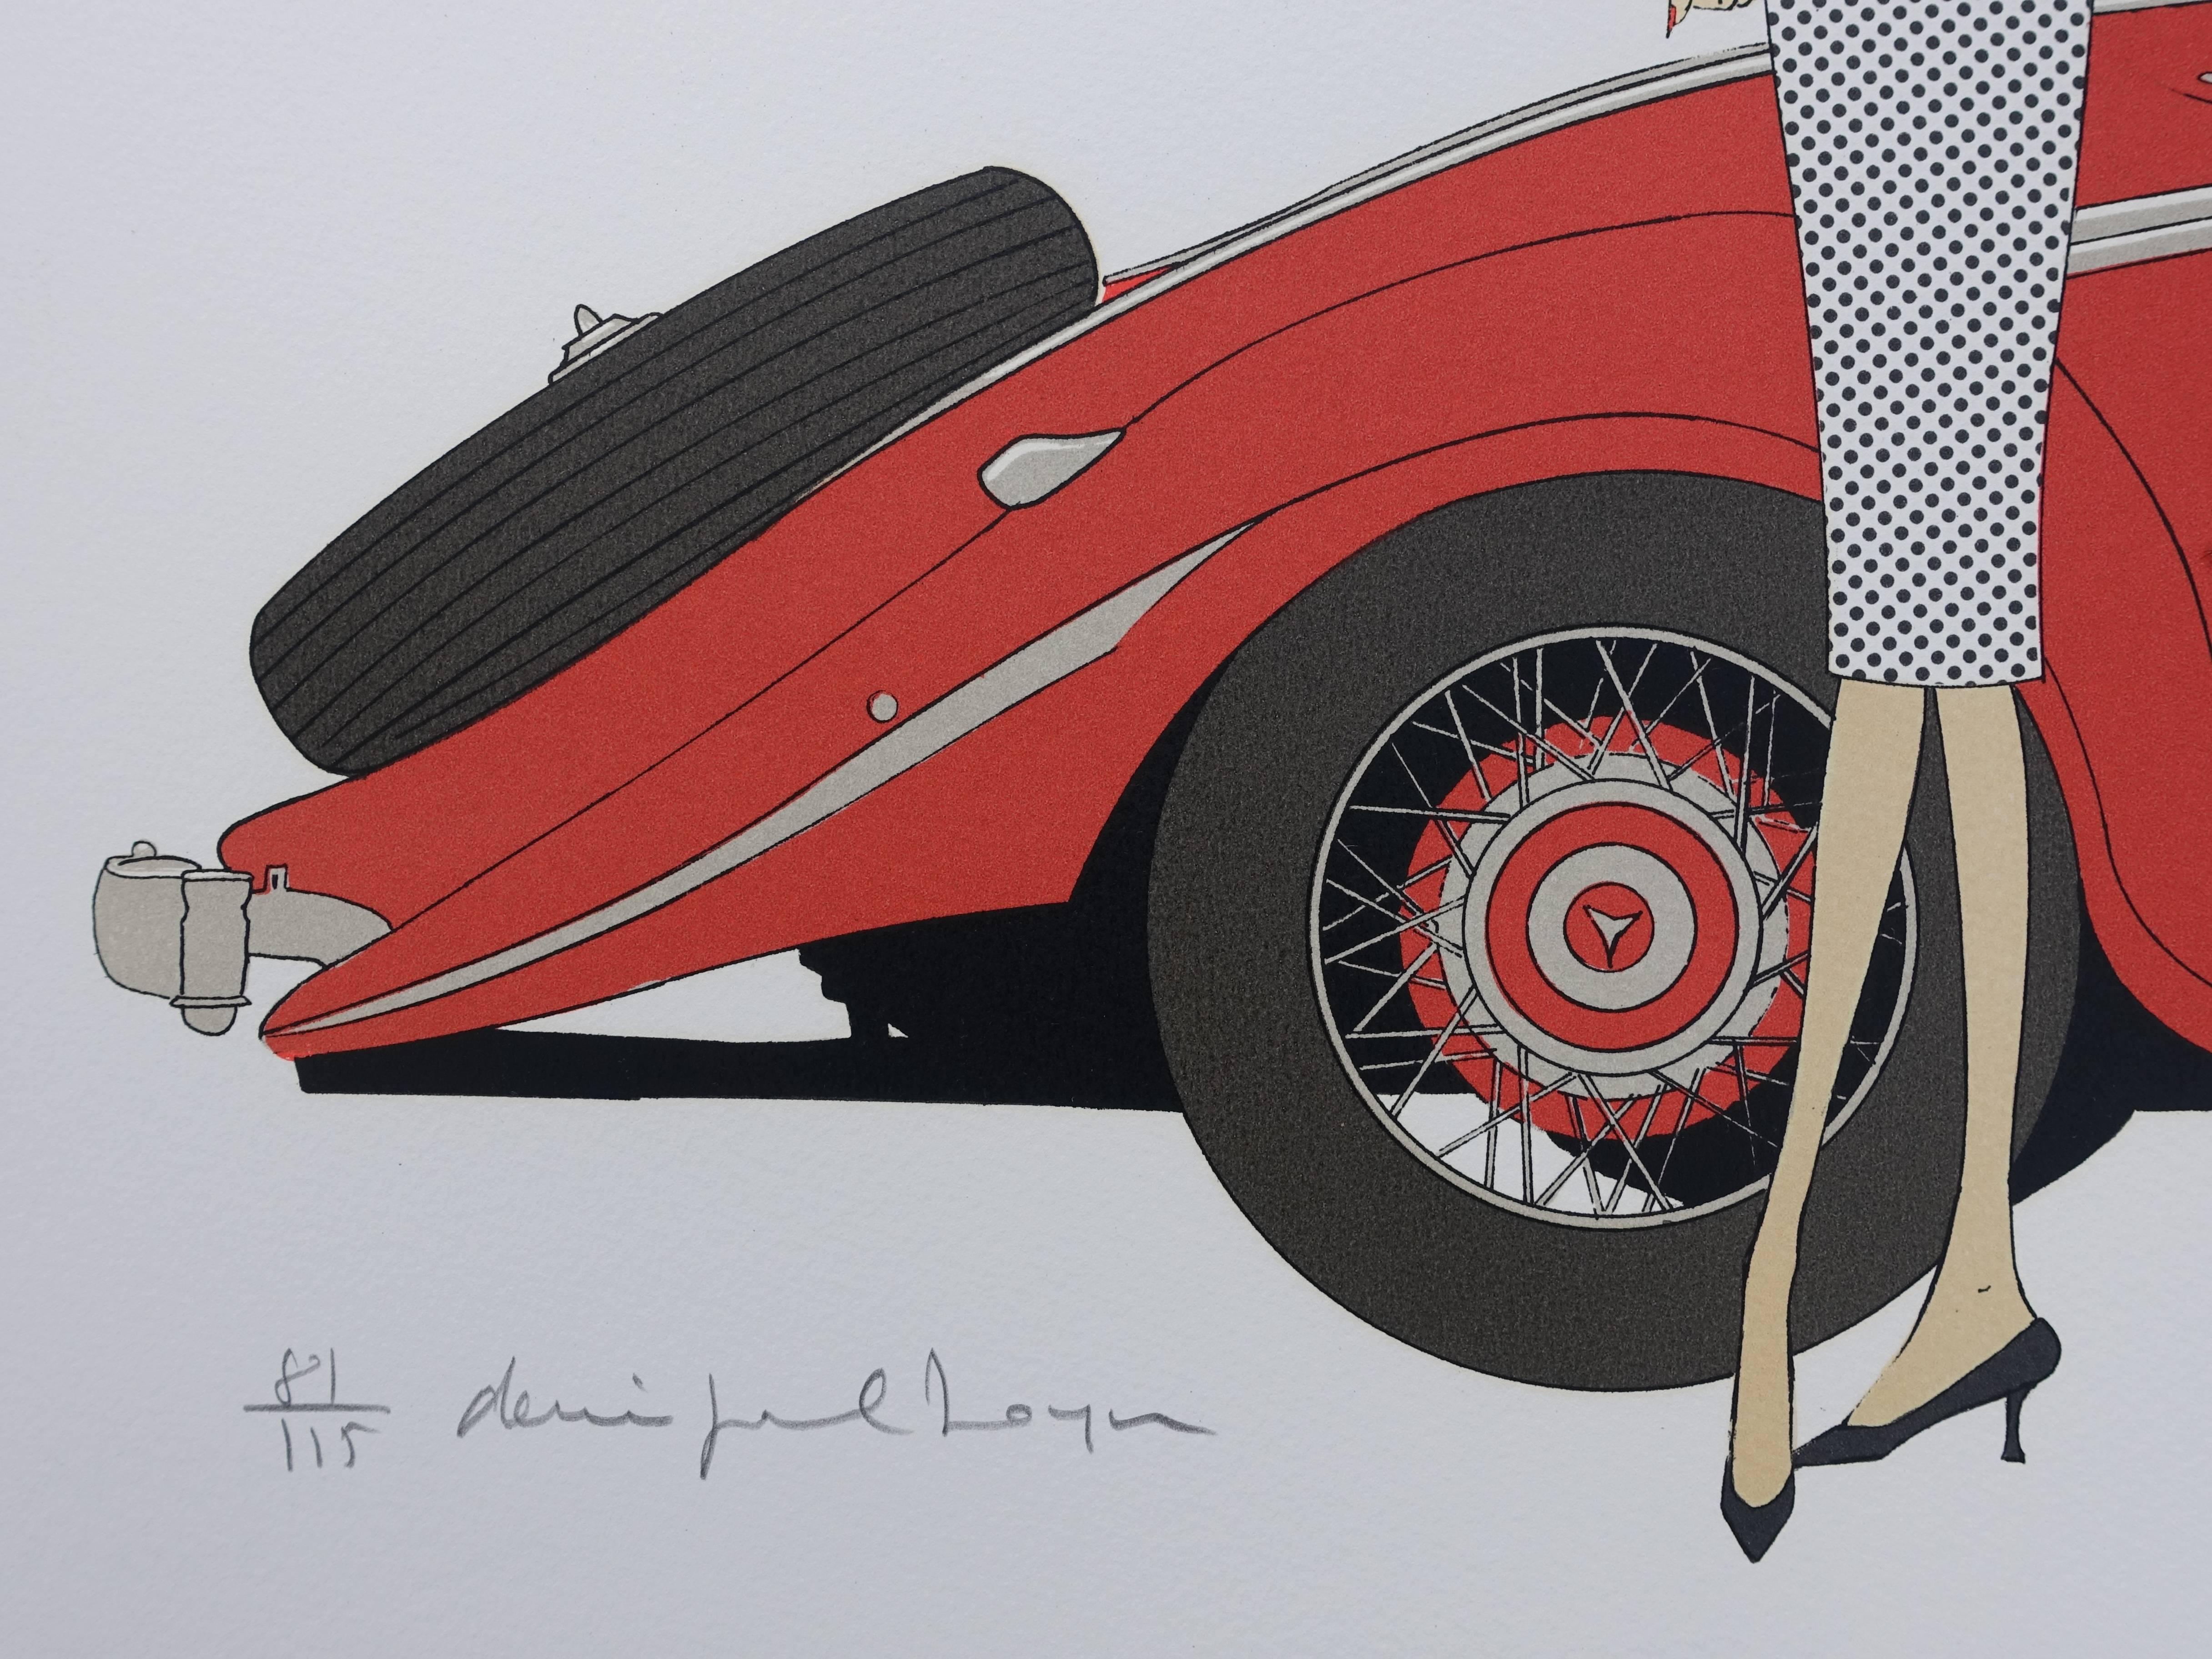 Hotel : Mercedes Roadster 540K & Plaza Athenee - Signed lithograph - Print by Denis Paul Noyer